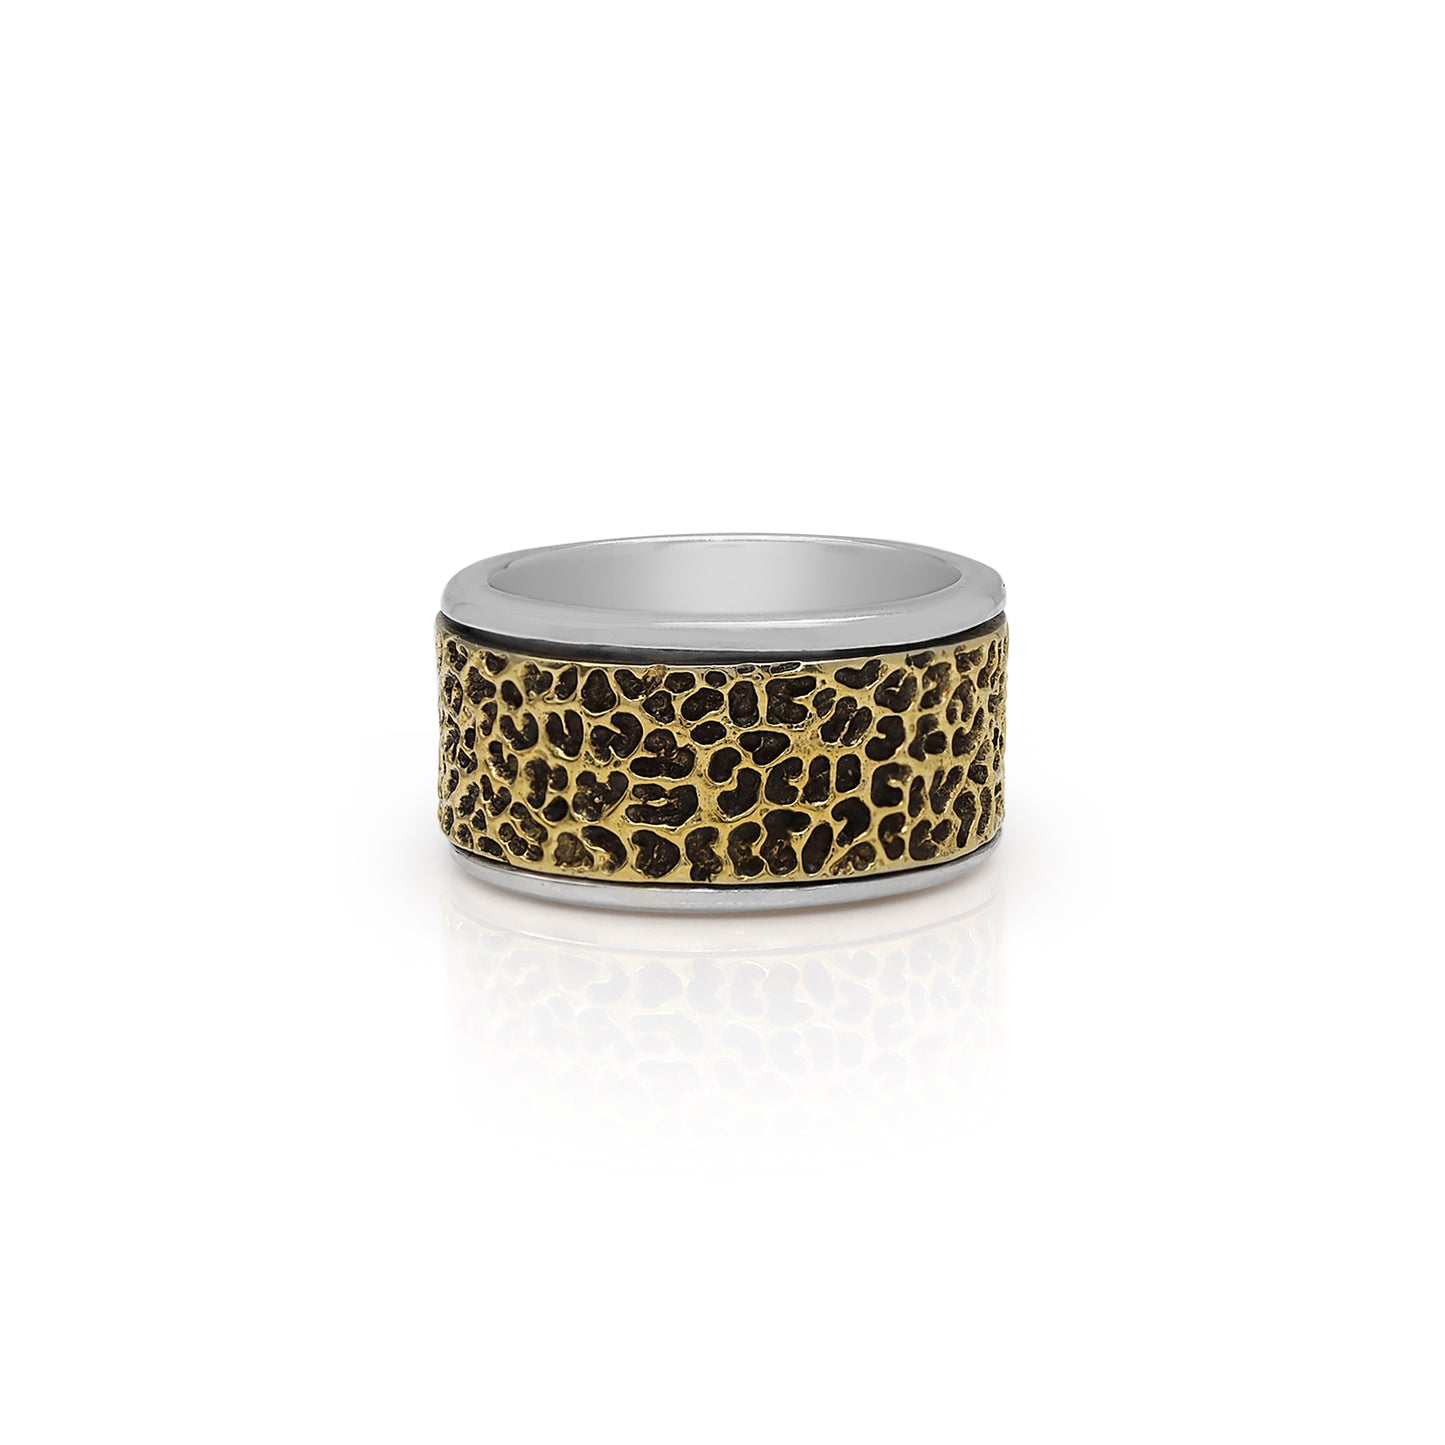 Leopard Spin Ring - M